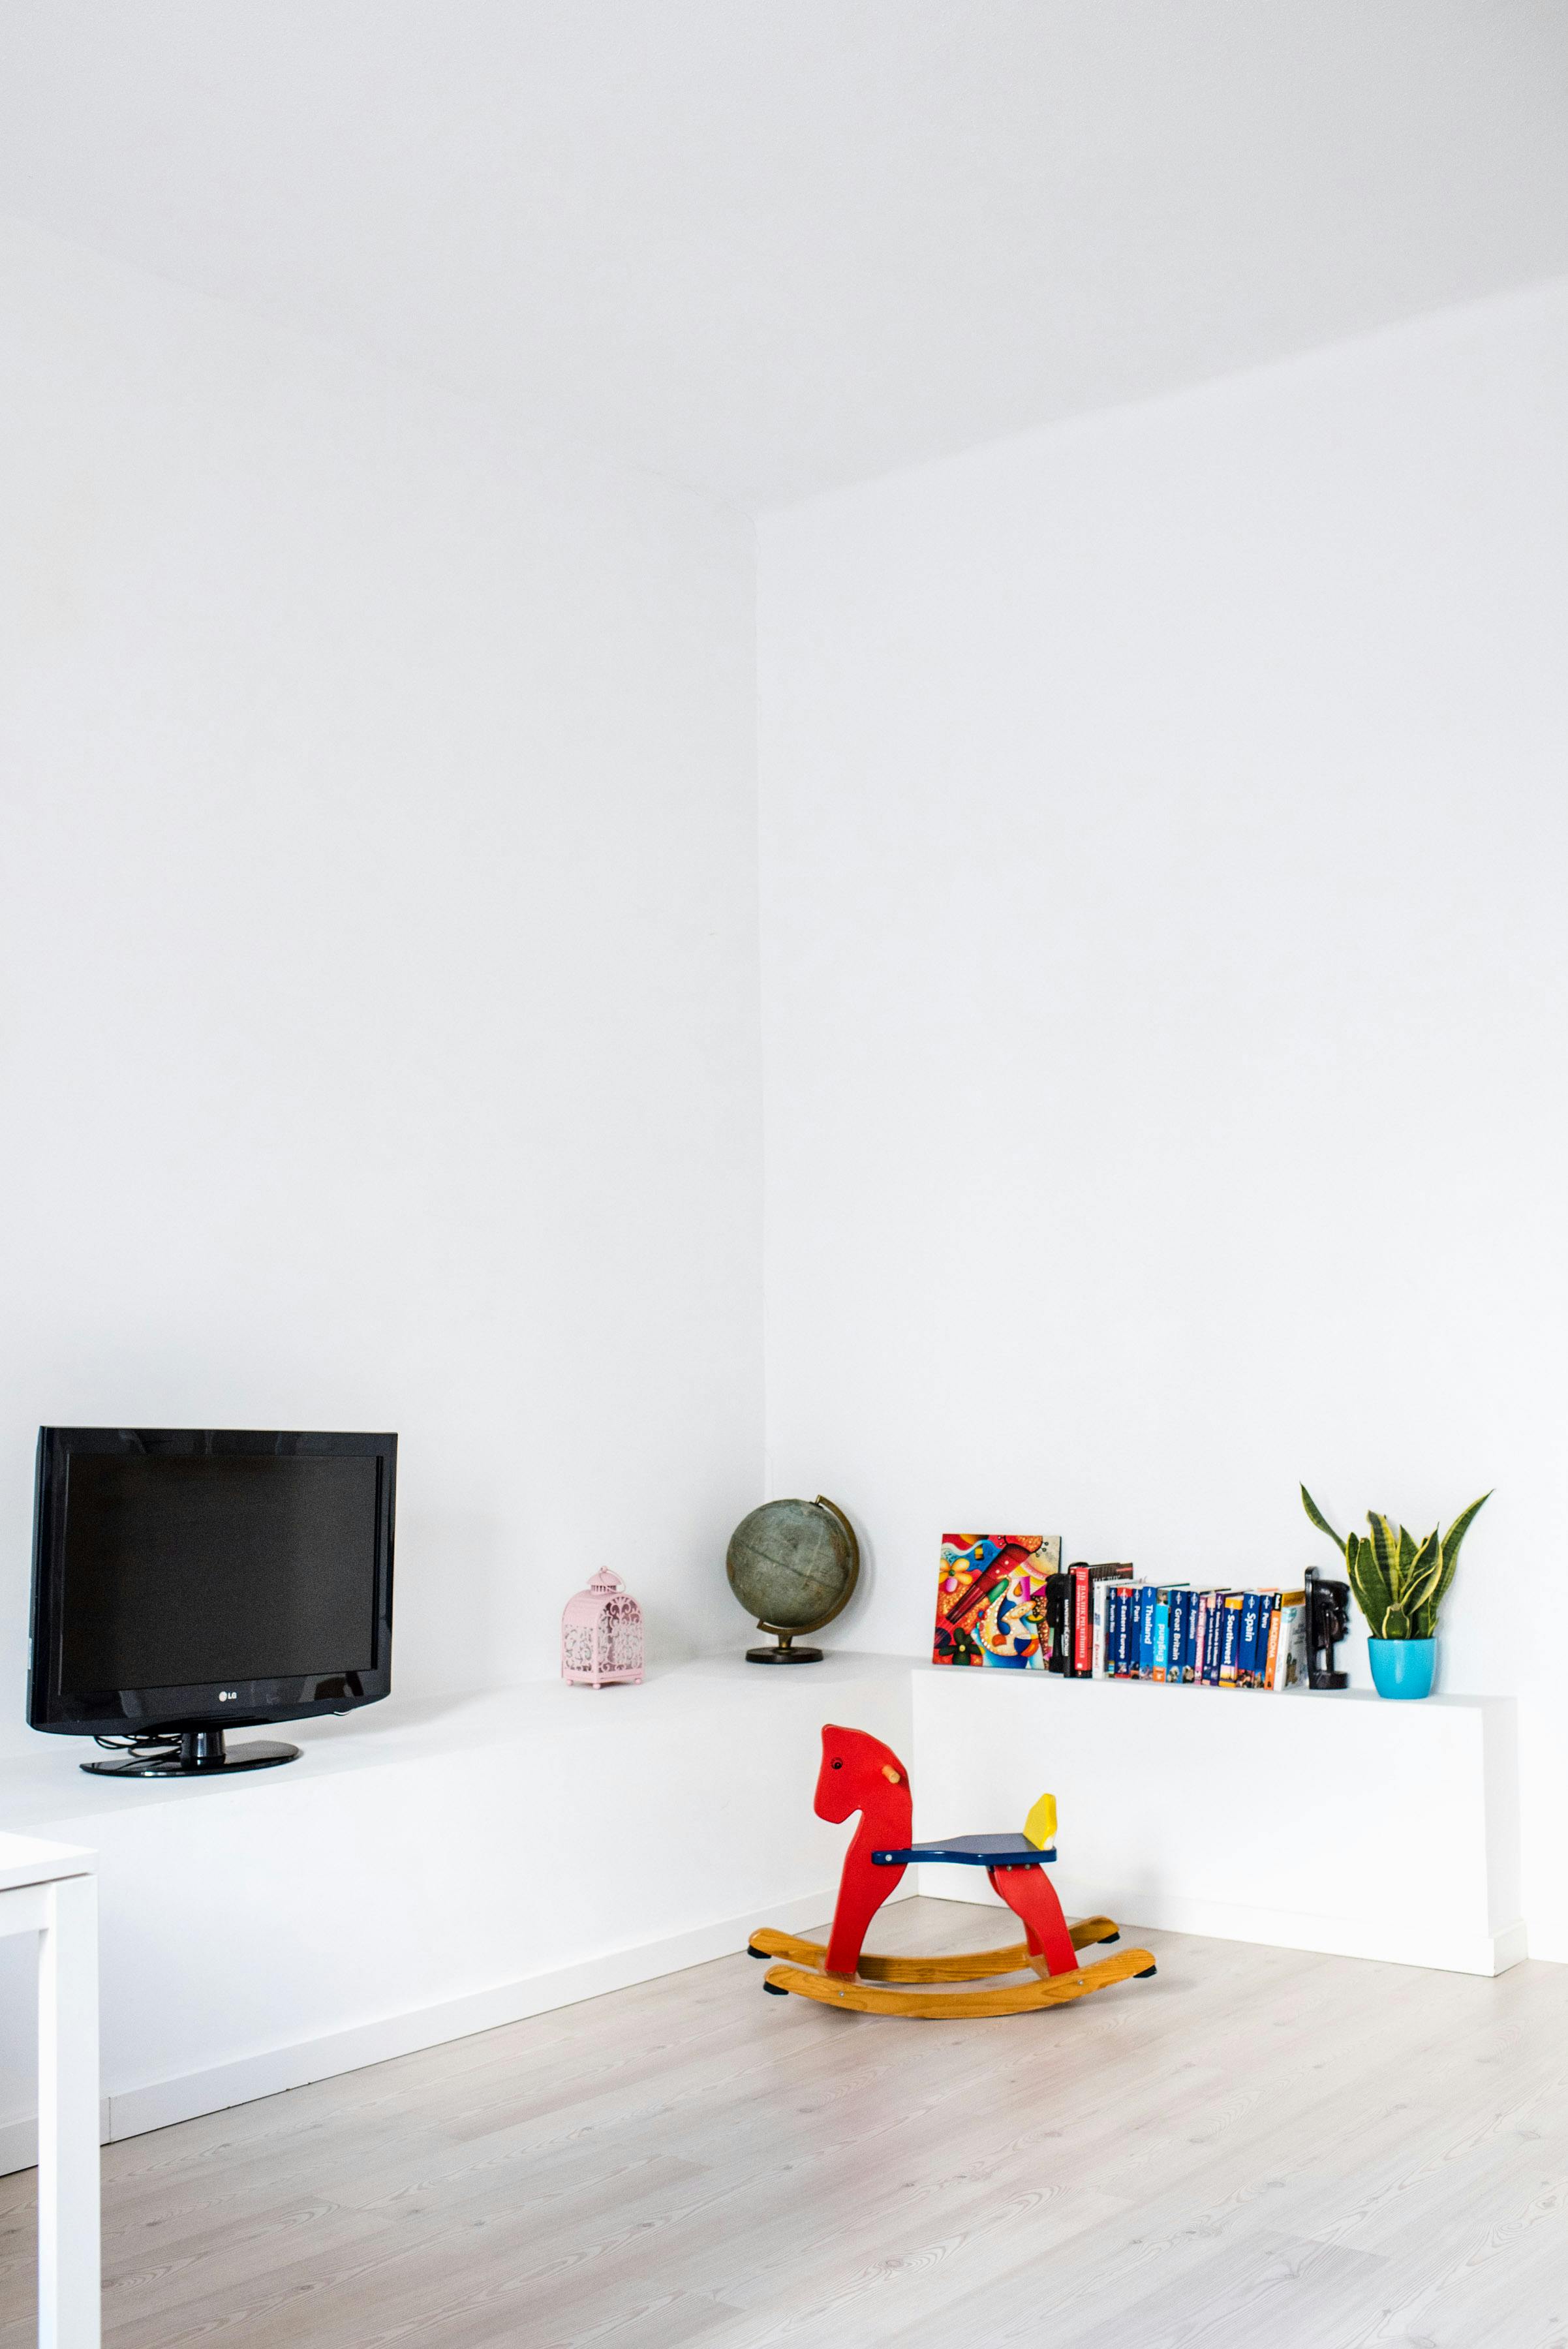 Kids Room Photos, Download The BEST Free Kids Room Stock Photos & HD Images